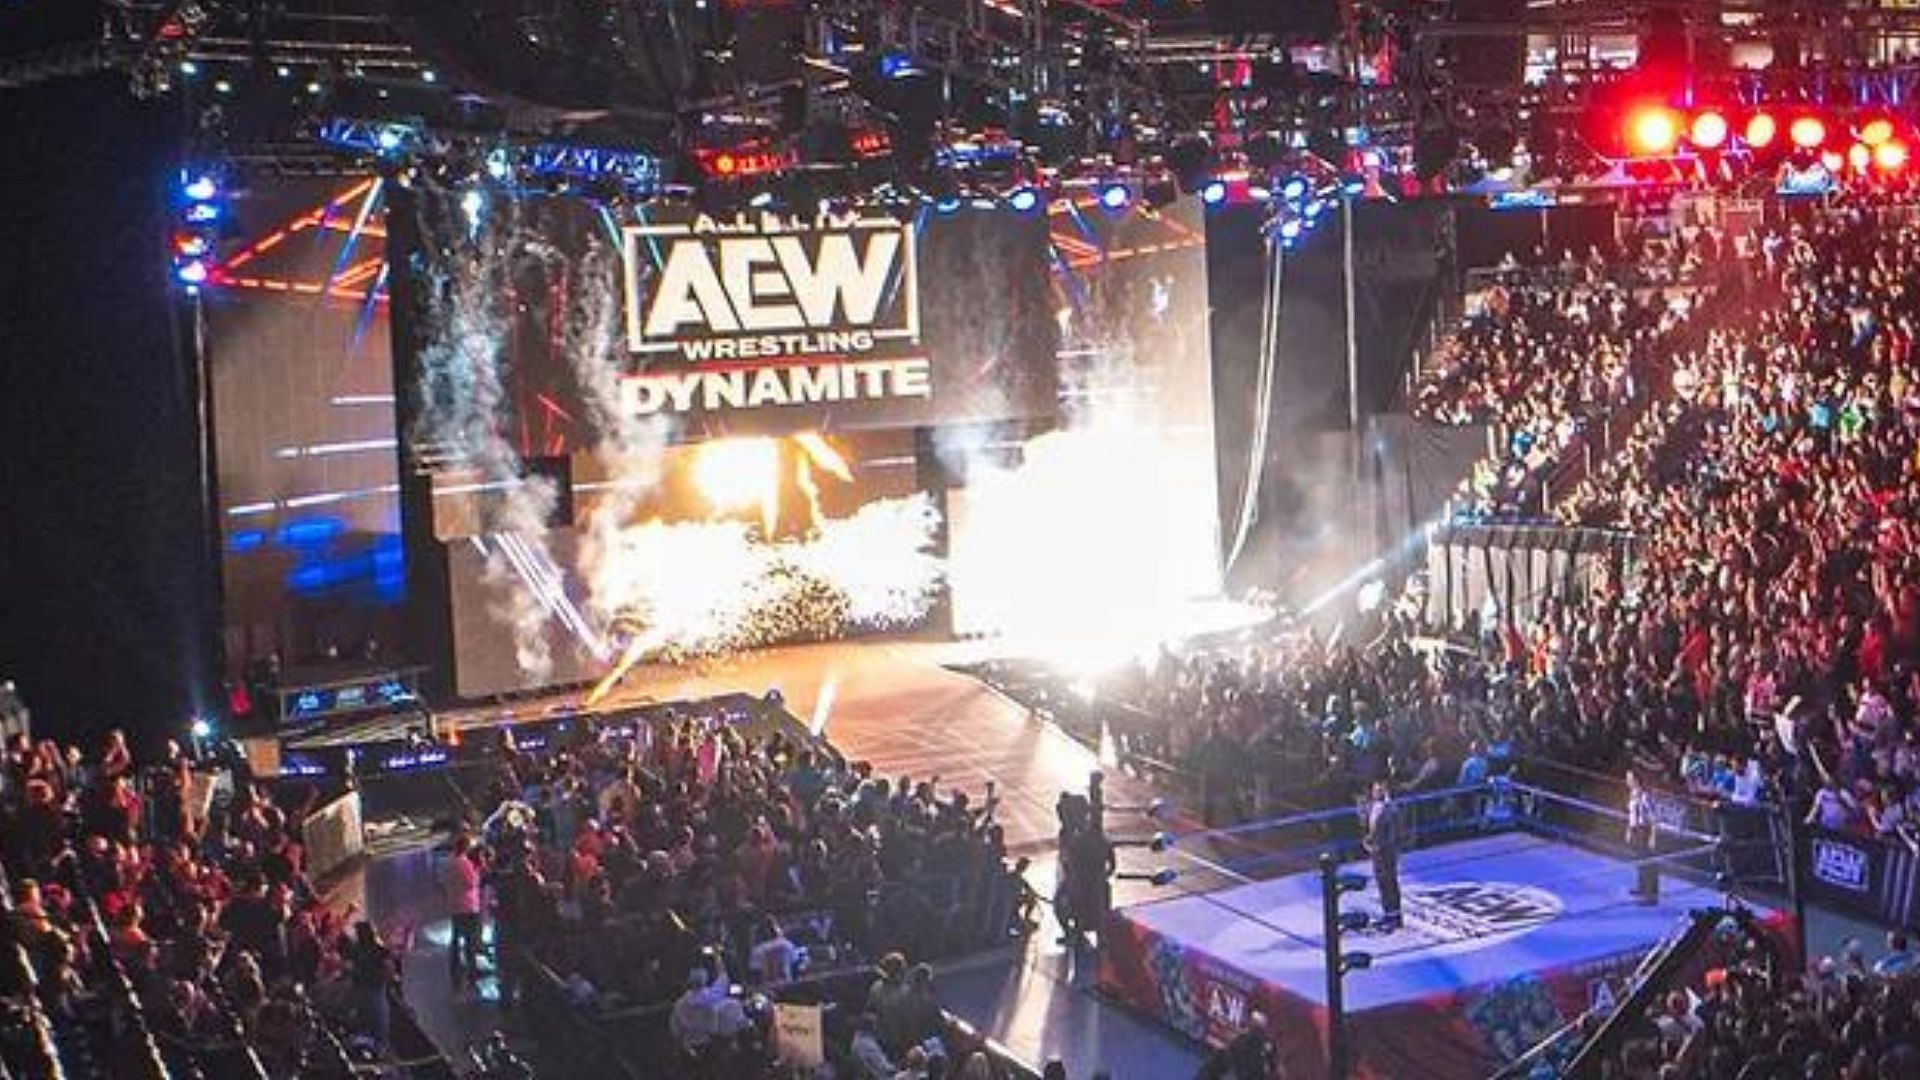 A former WWE Champion stated that he is having fun with his AEW career